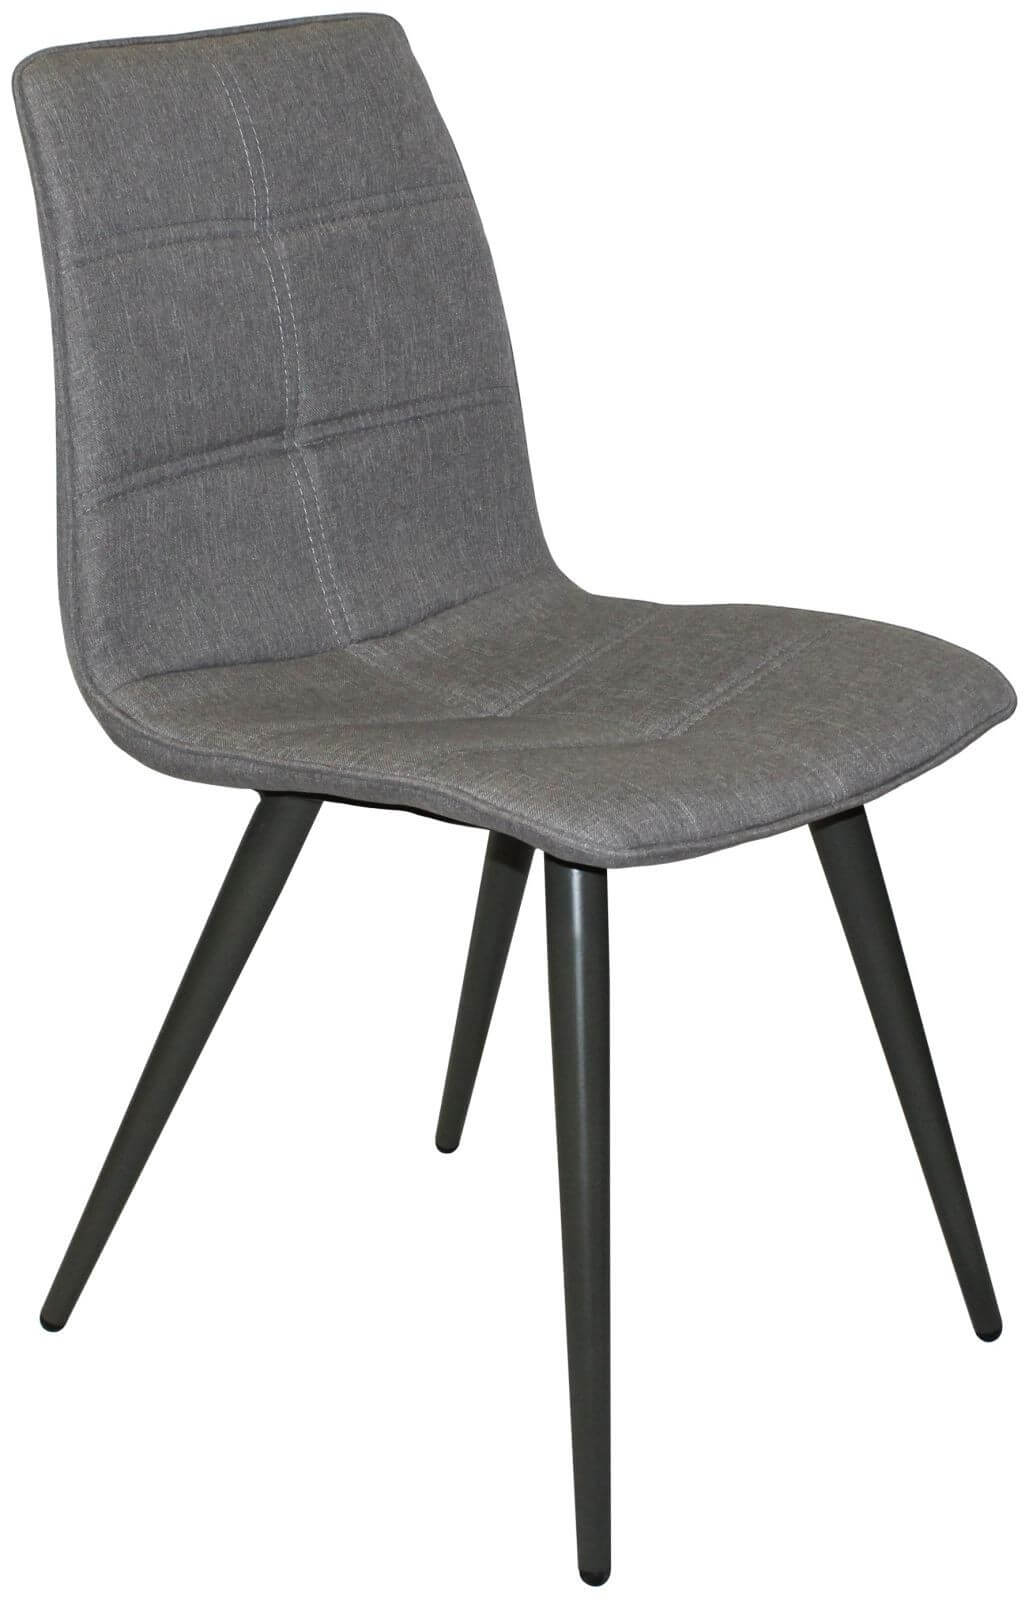 Showing image for Motion dining chair